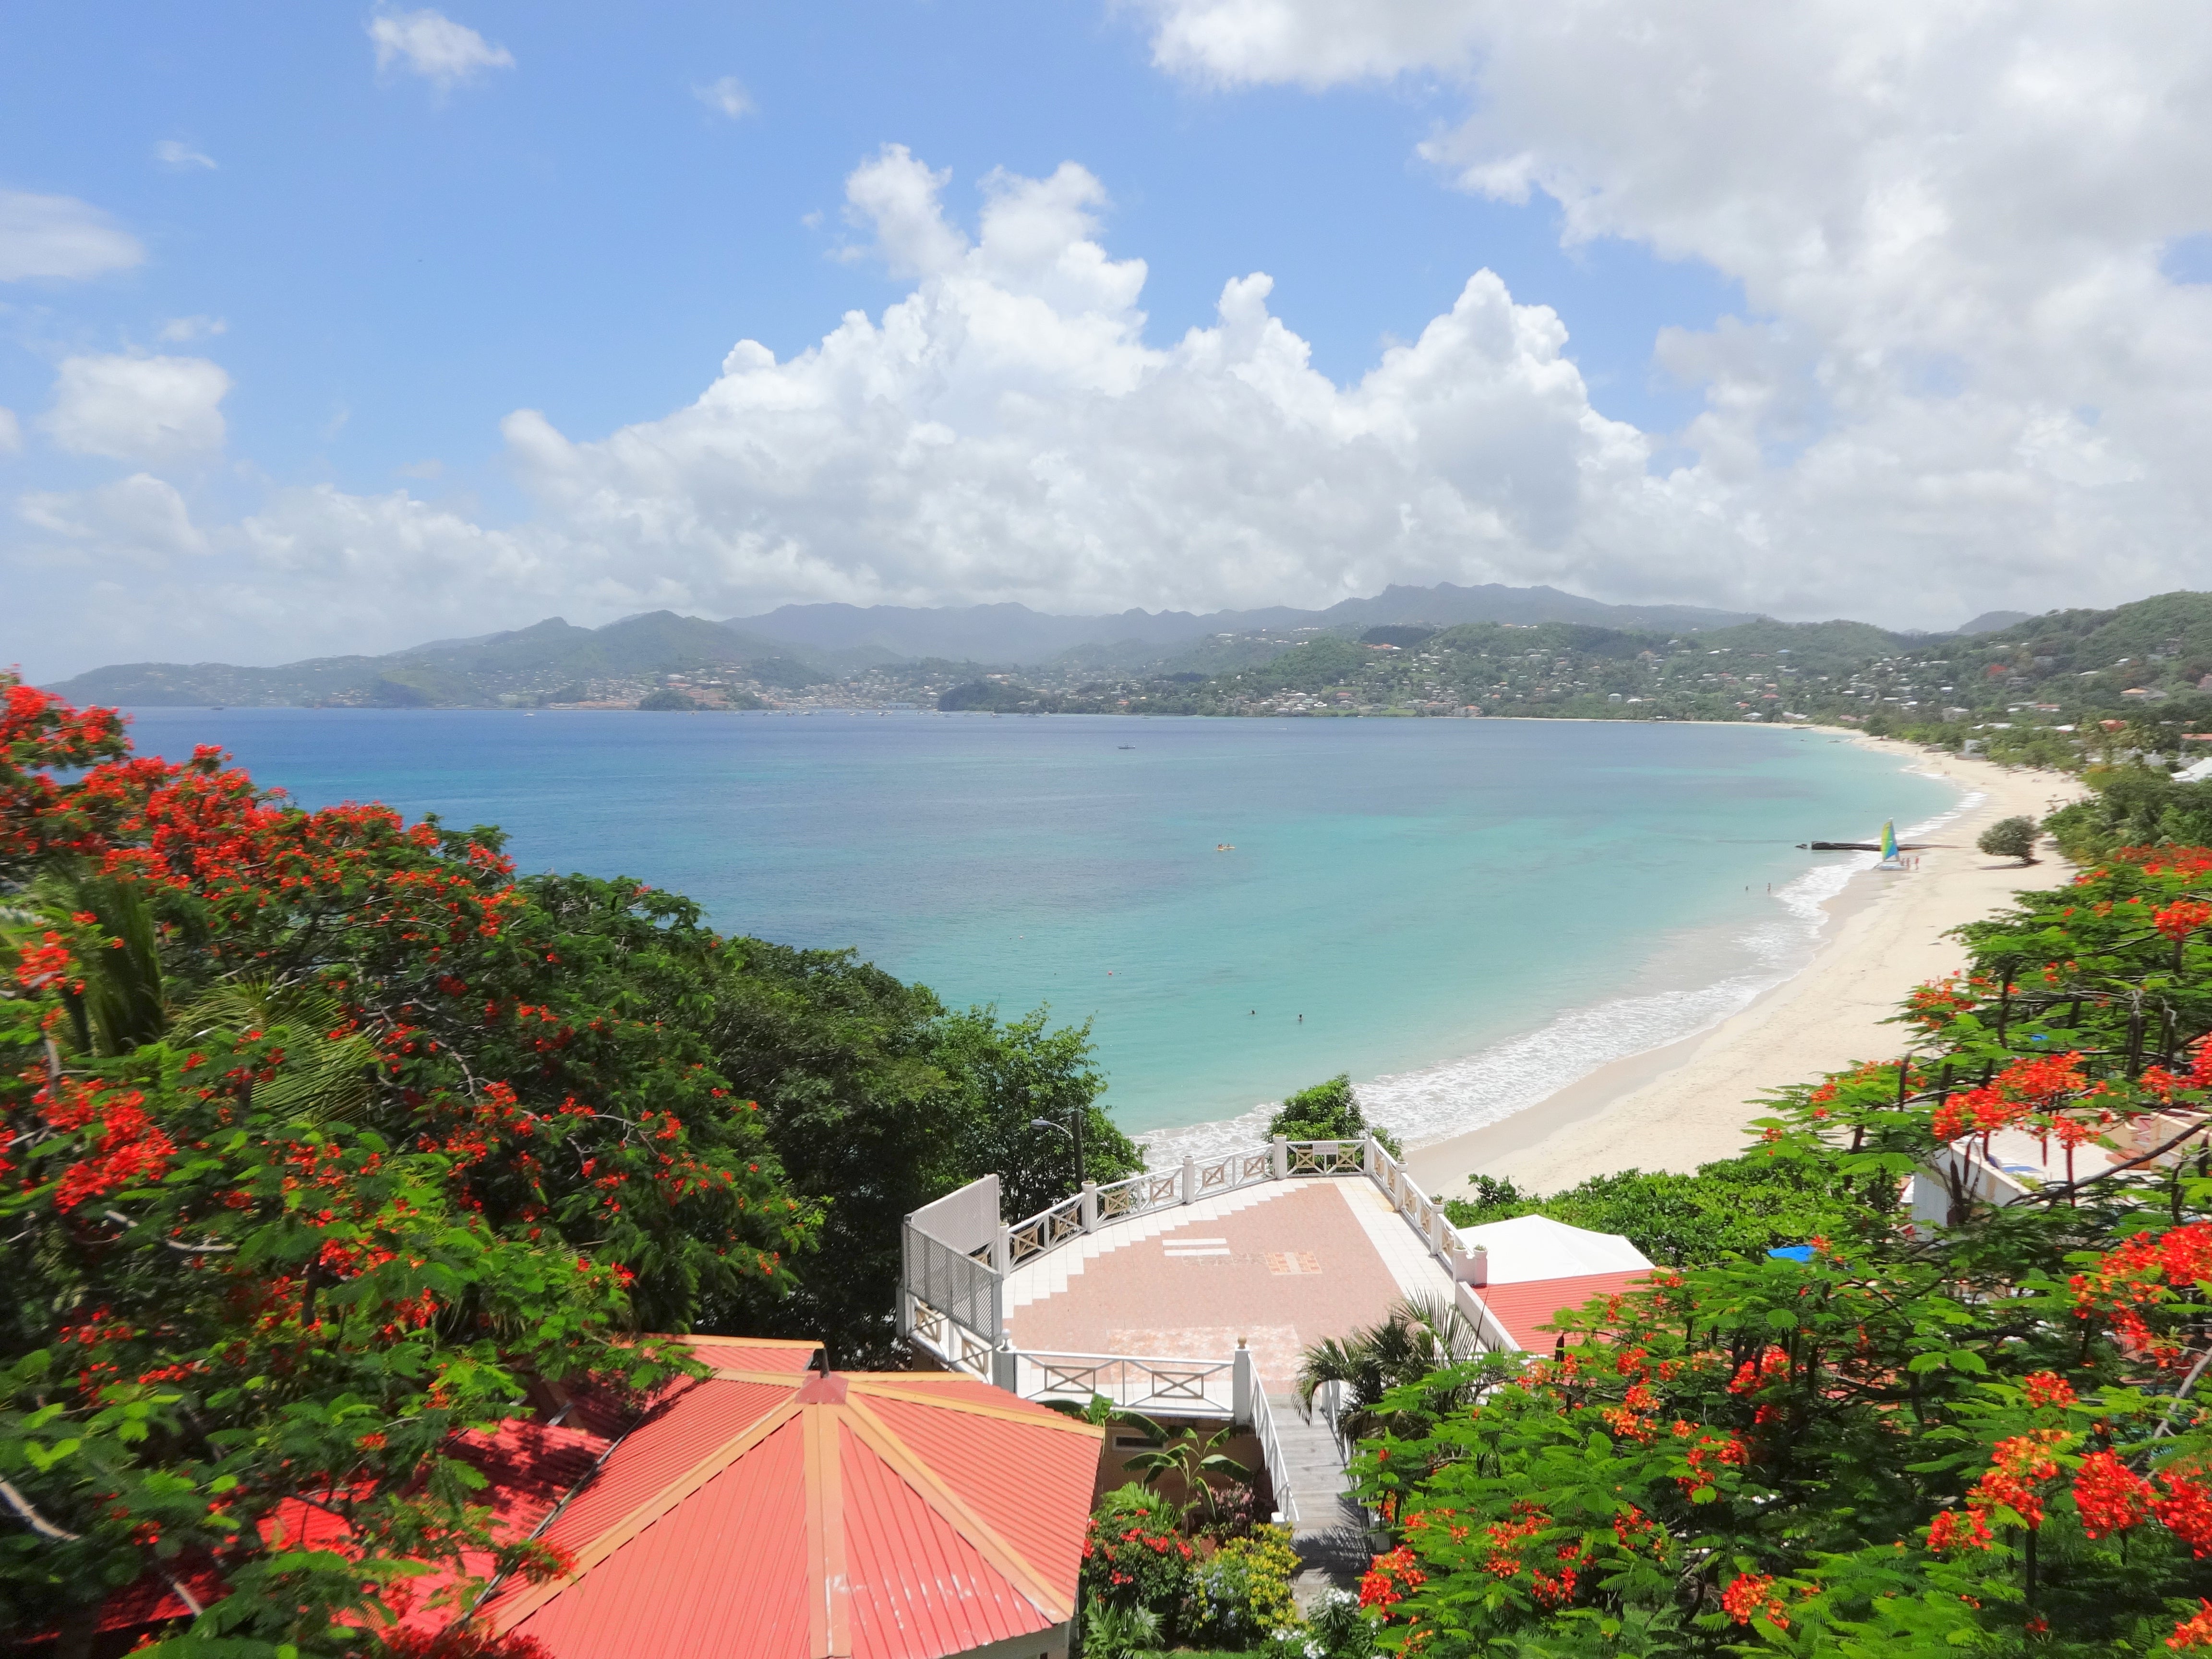 A hilltop view of Grand Anse, Grenada